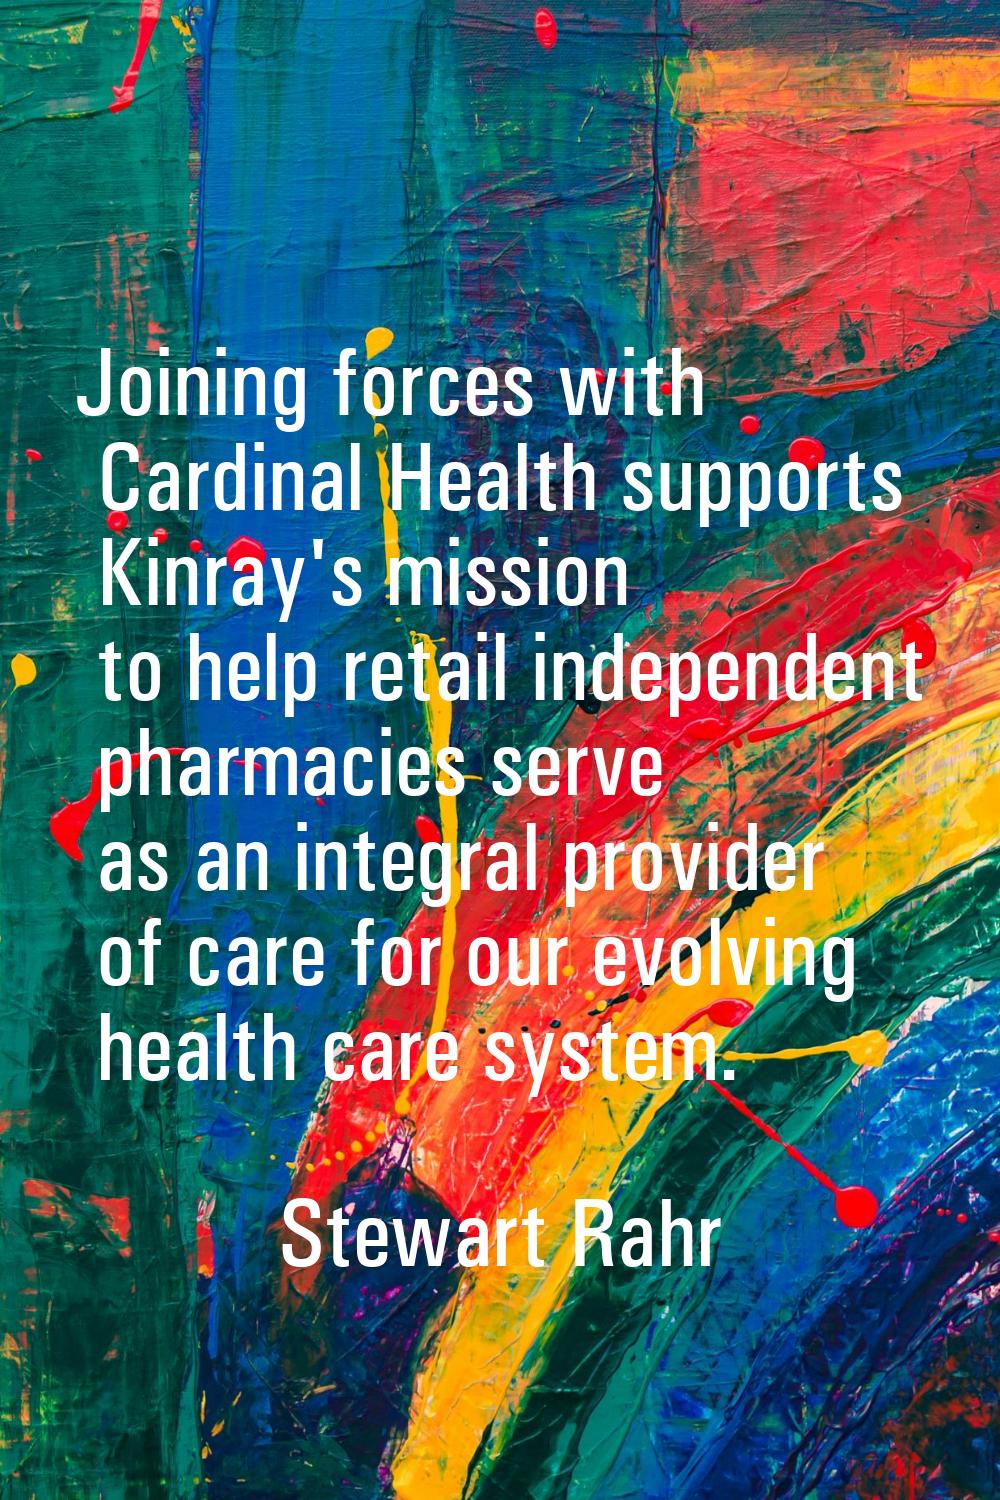 Joining forces with Cardinal Health supports Kinray's mission to help retail independent pharmacies